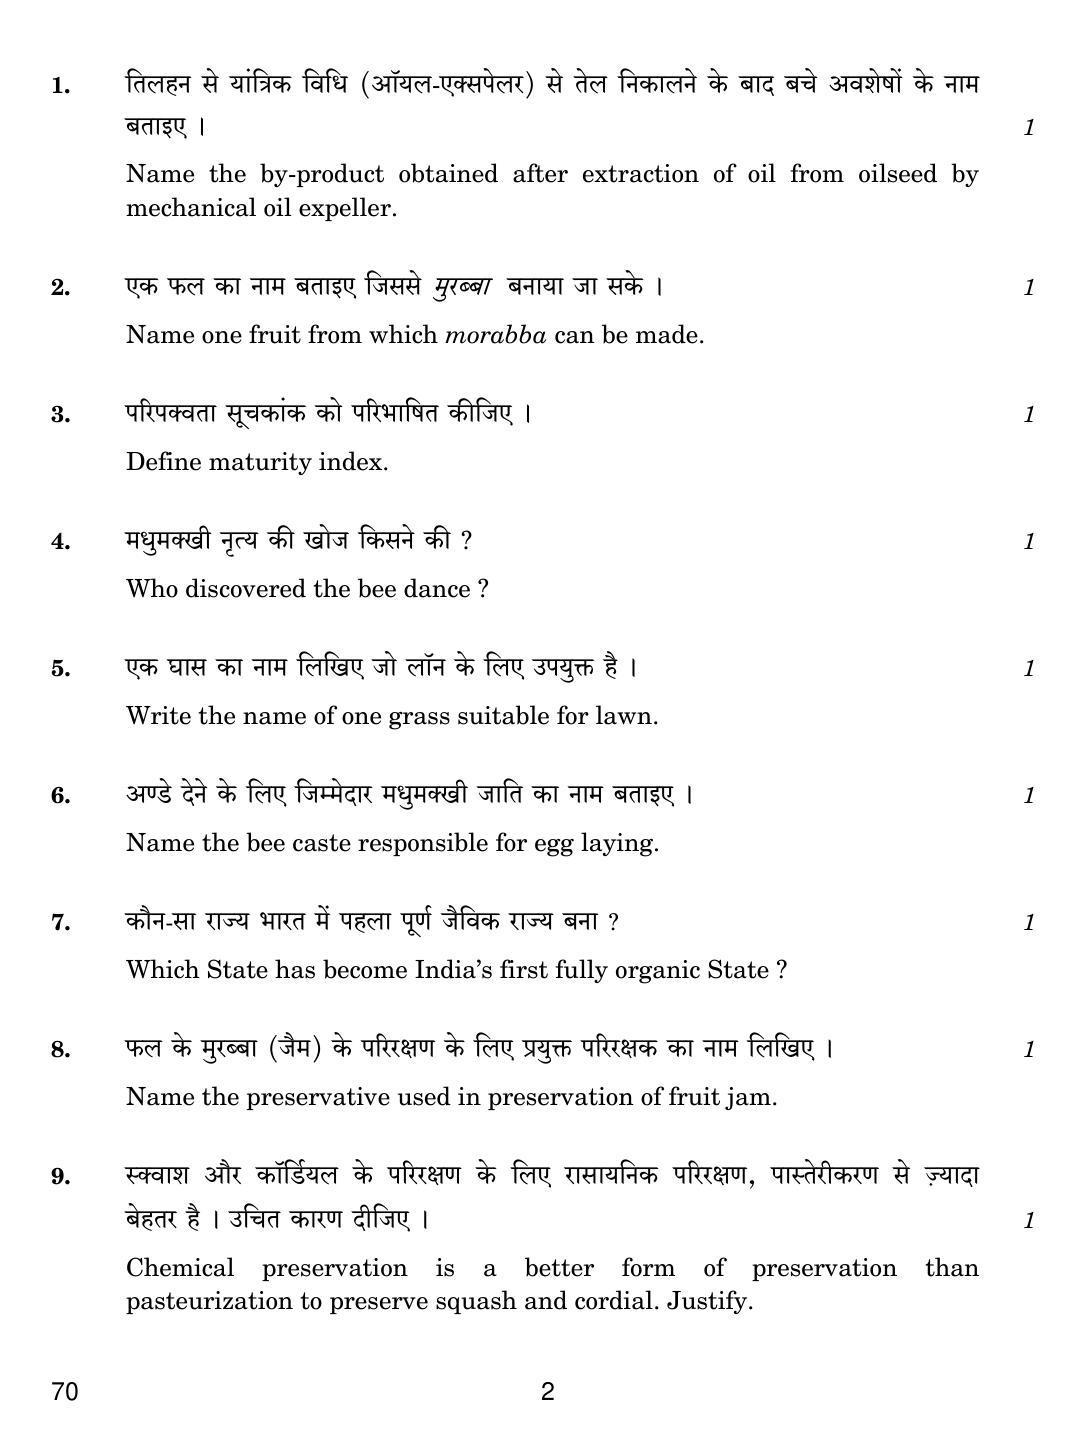 CBSE Class 12 70 Agriculture 2019 Question Paper - Page 2